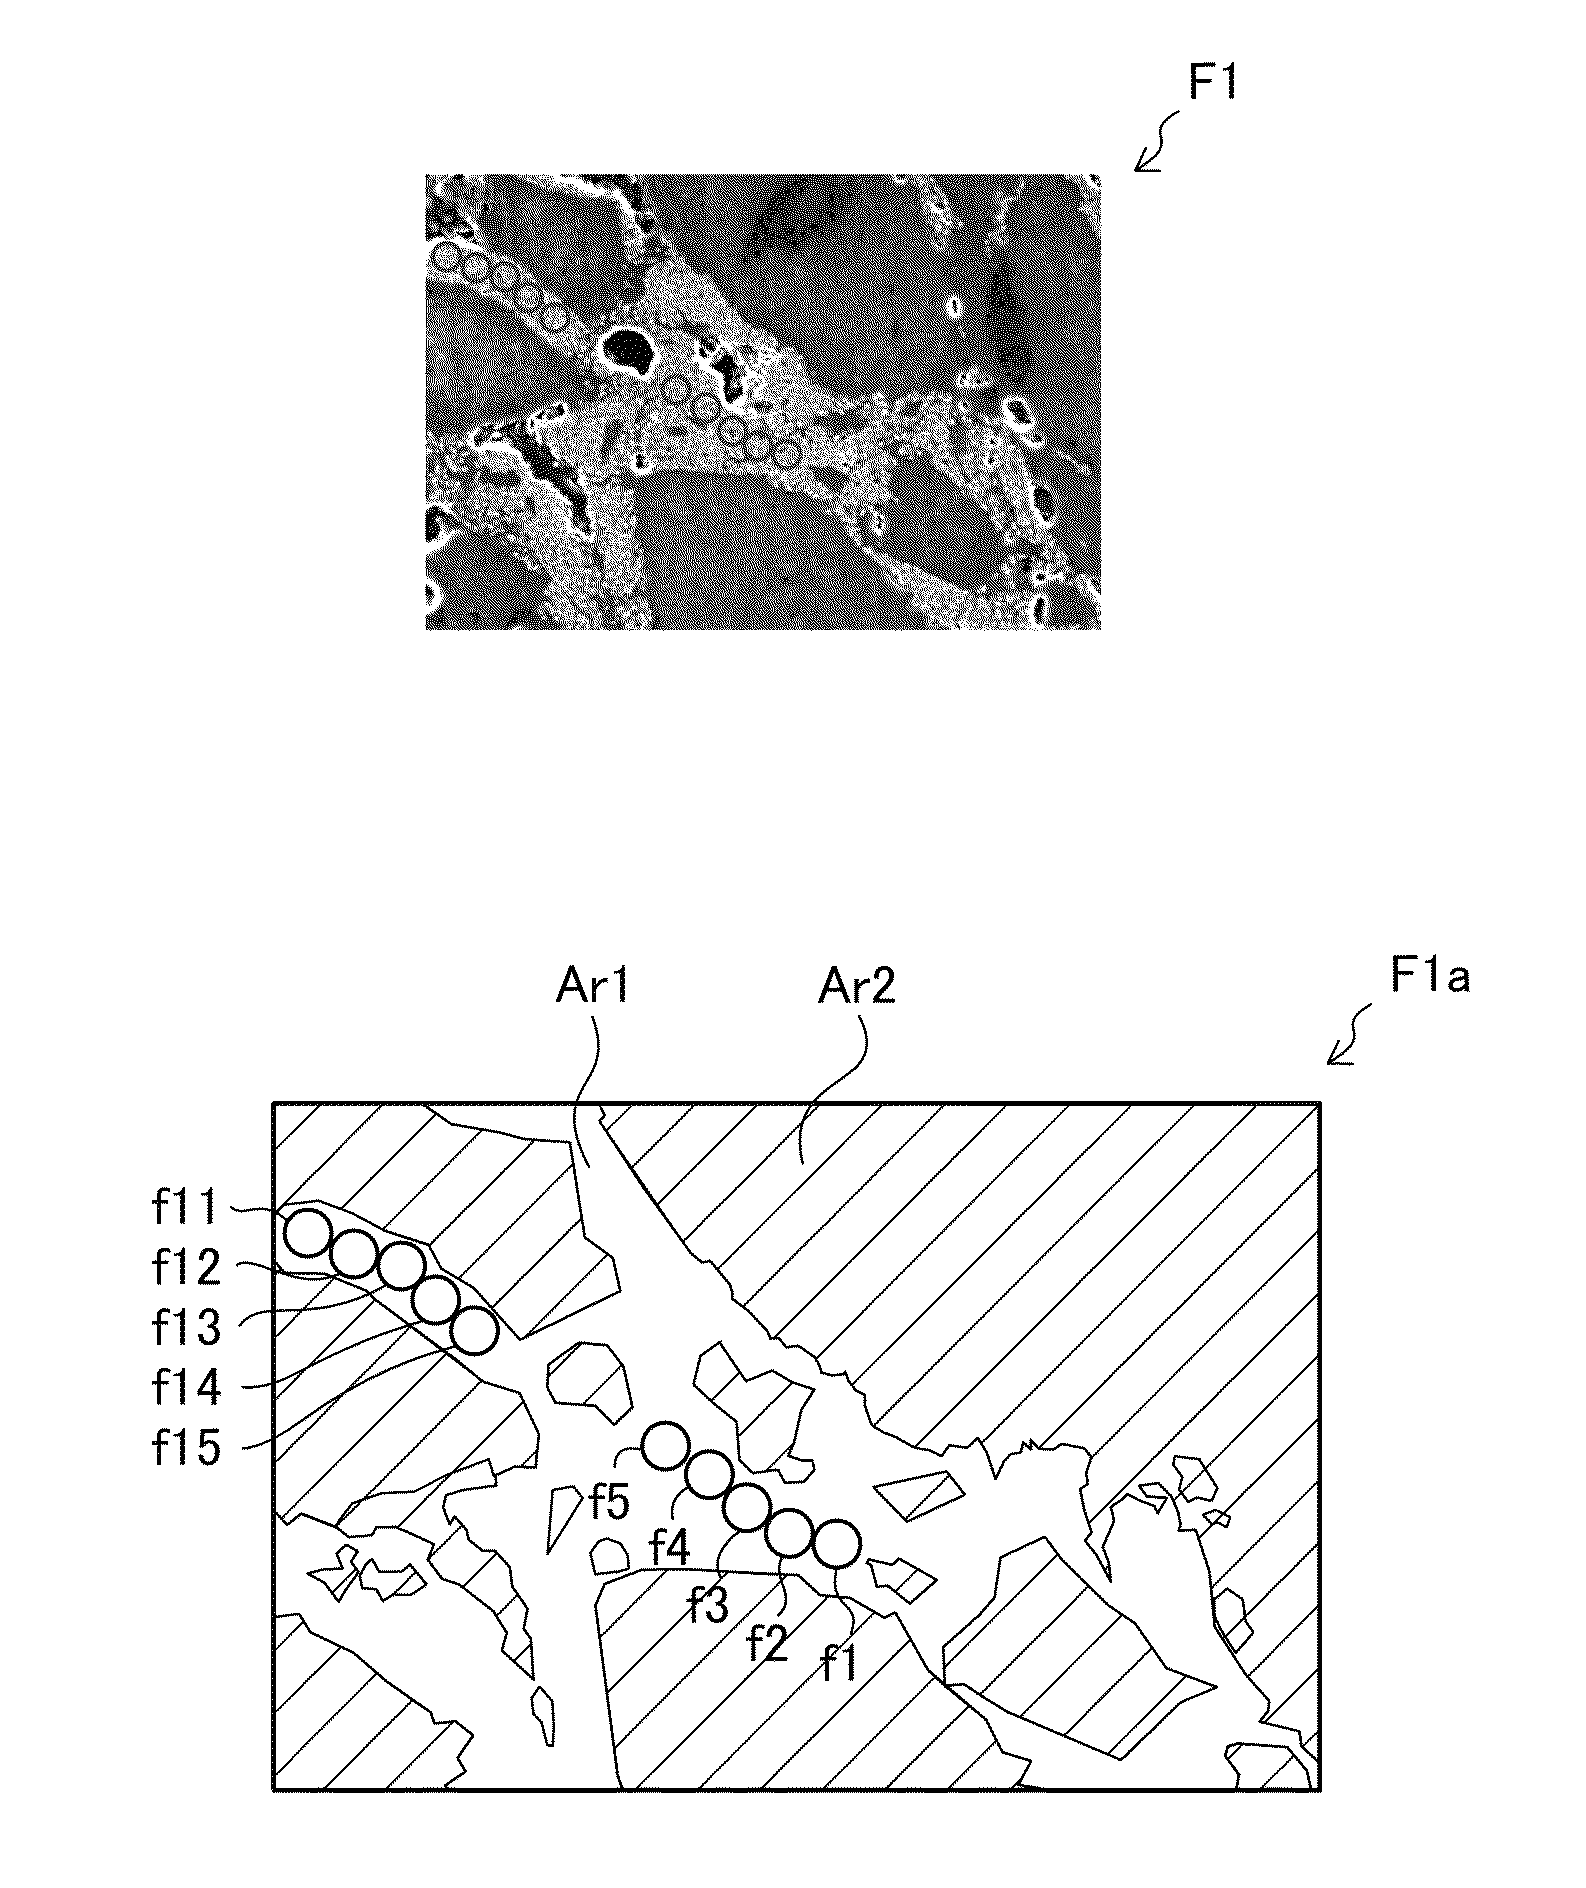 Spark plug with internal resistor having Ti and Zr components